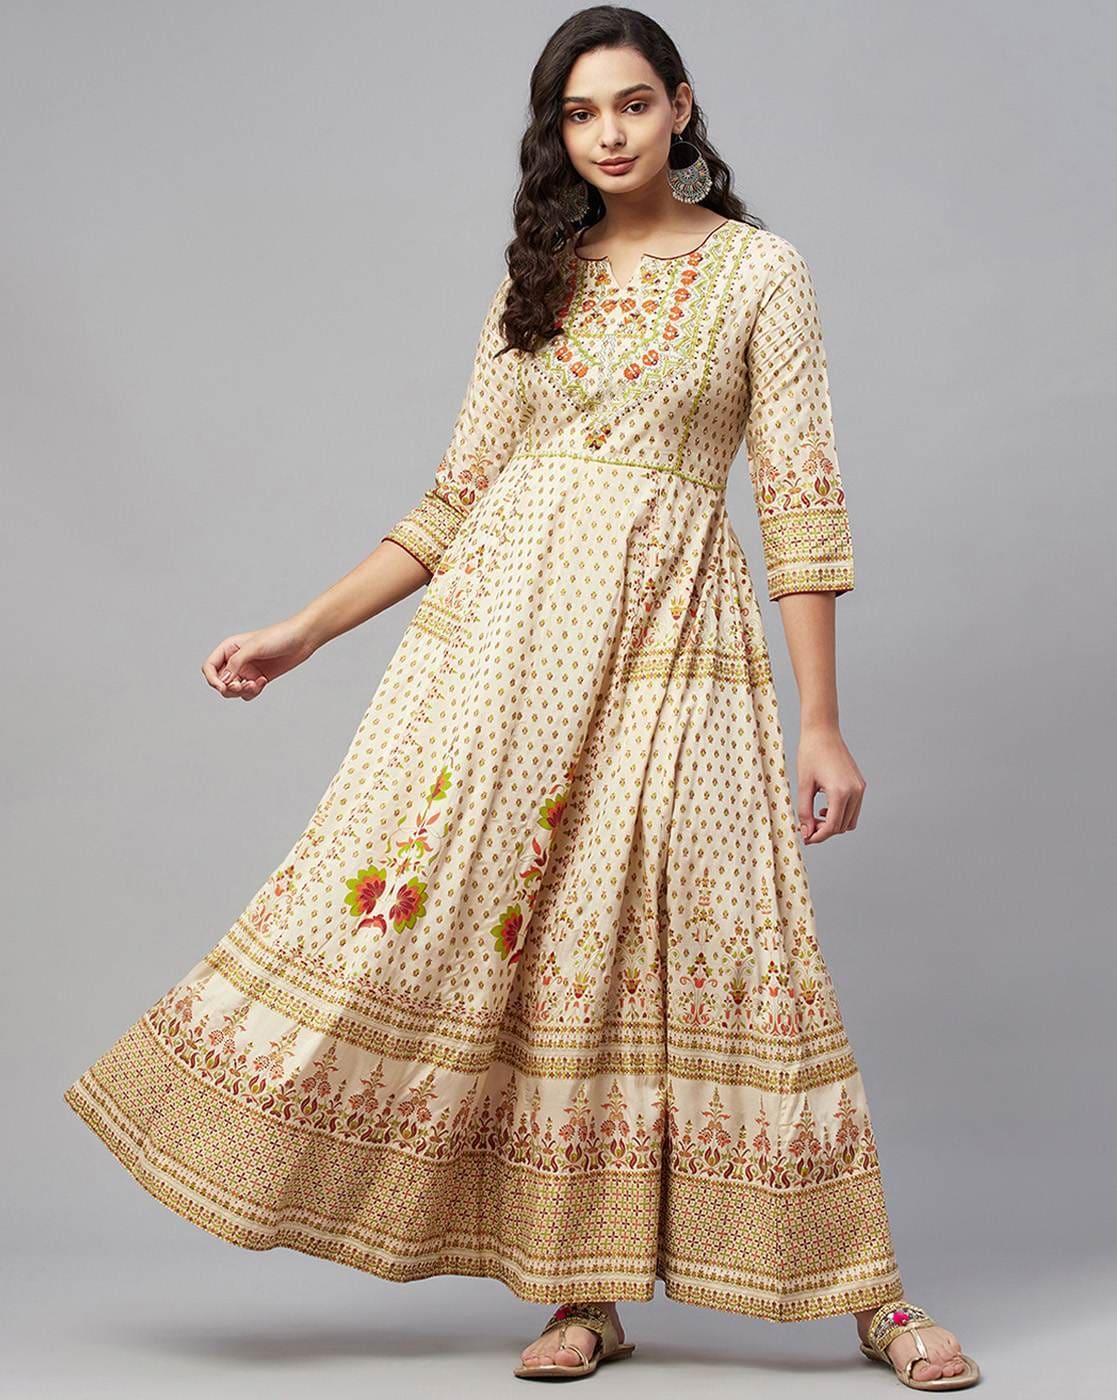 5 Ethnic Sets for Women from SHREE, Read Blog